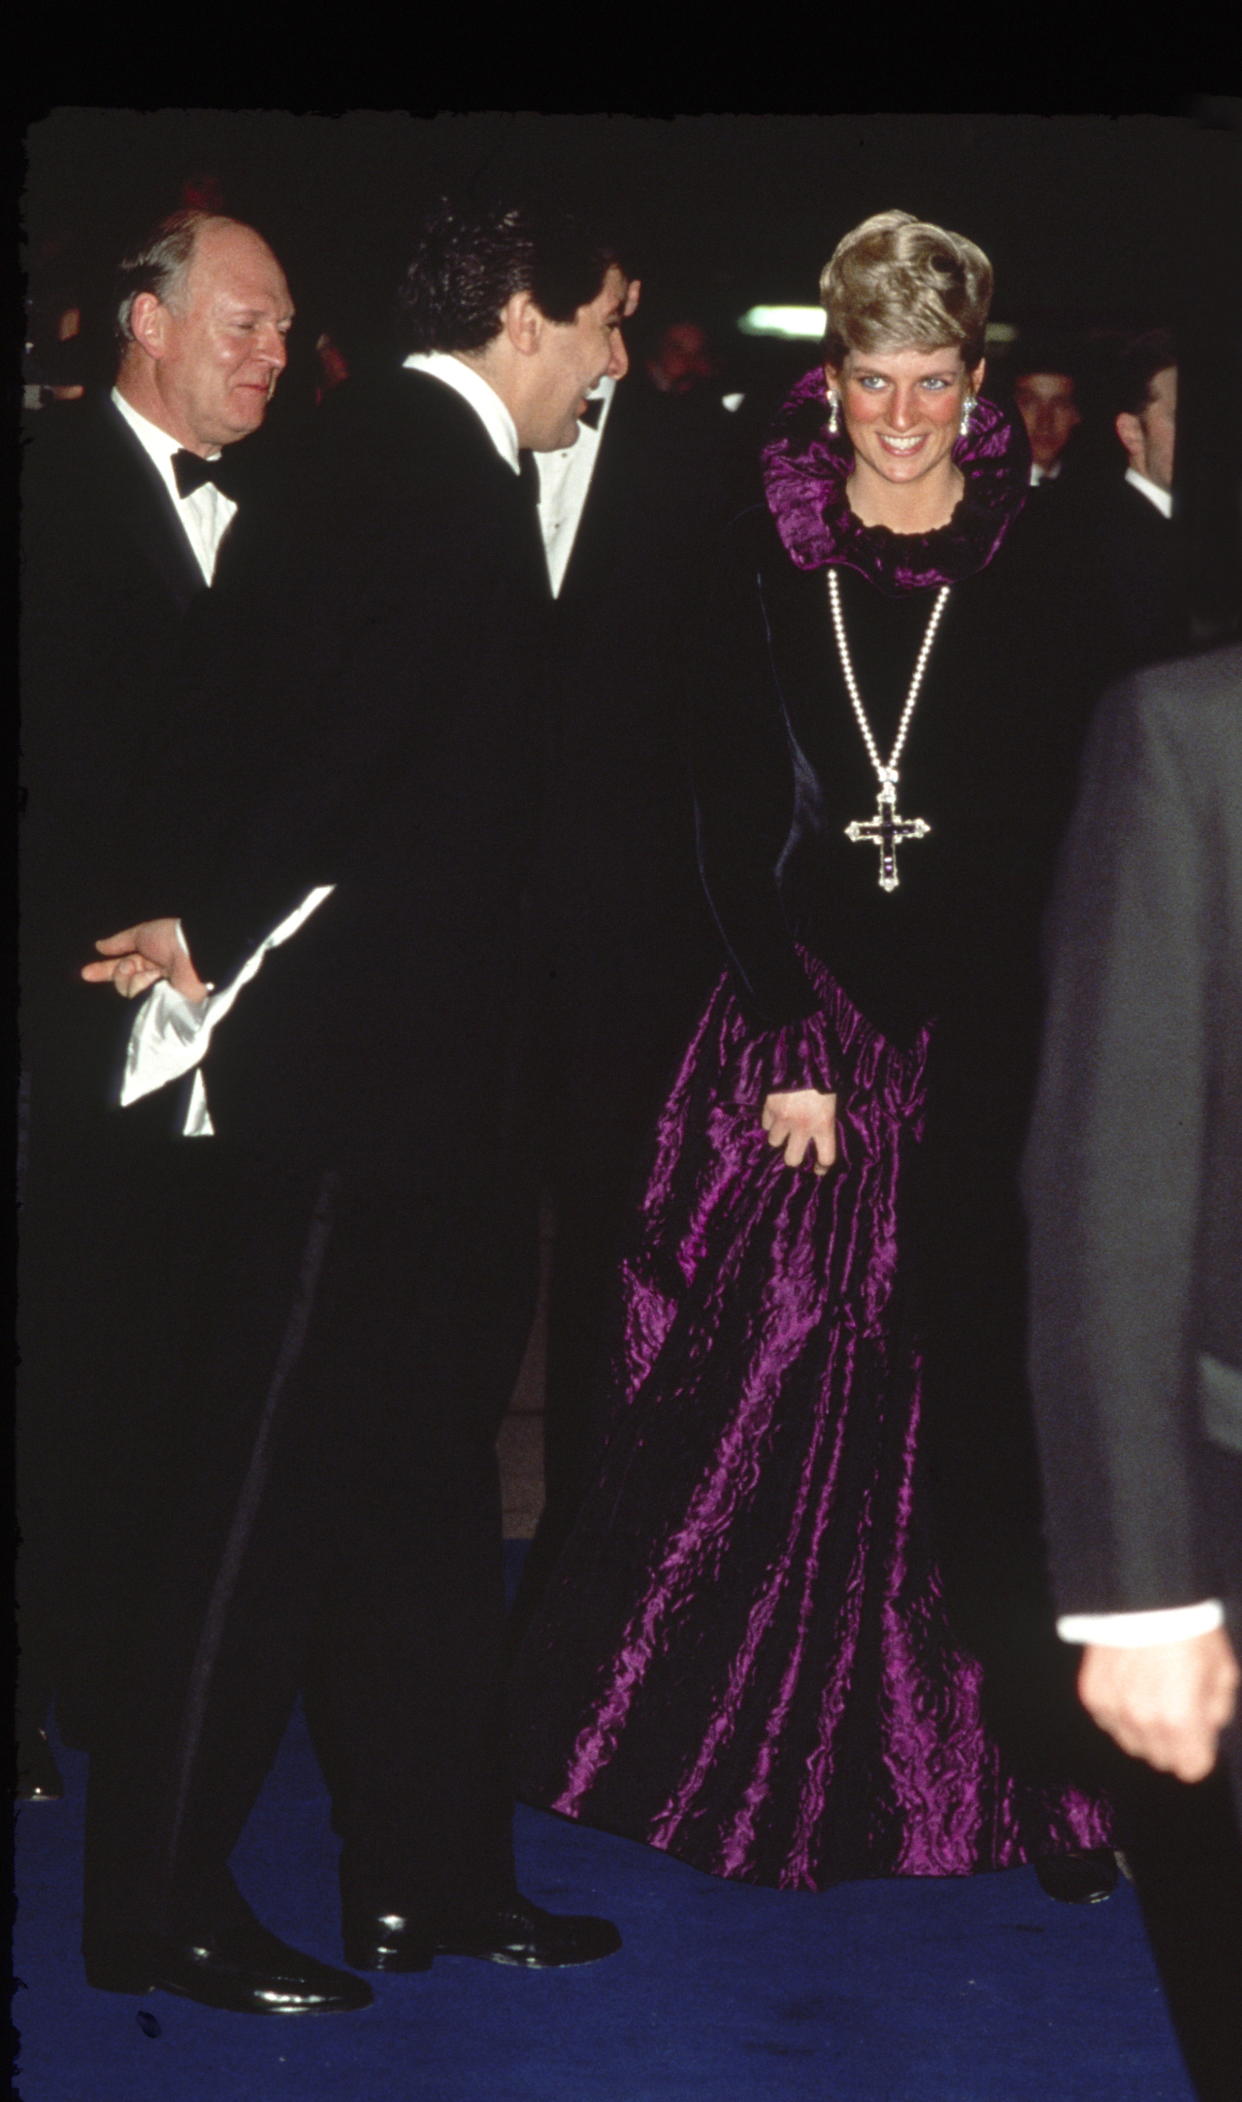 Diana, Princess Of Wales, arriving at a charity gala wearing the cross necklace in 1987. (Getty Images)